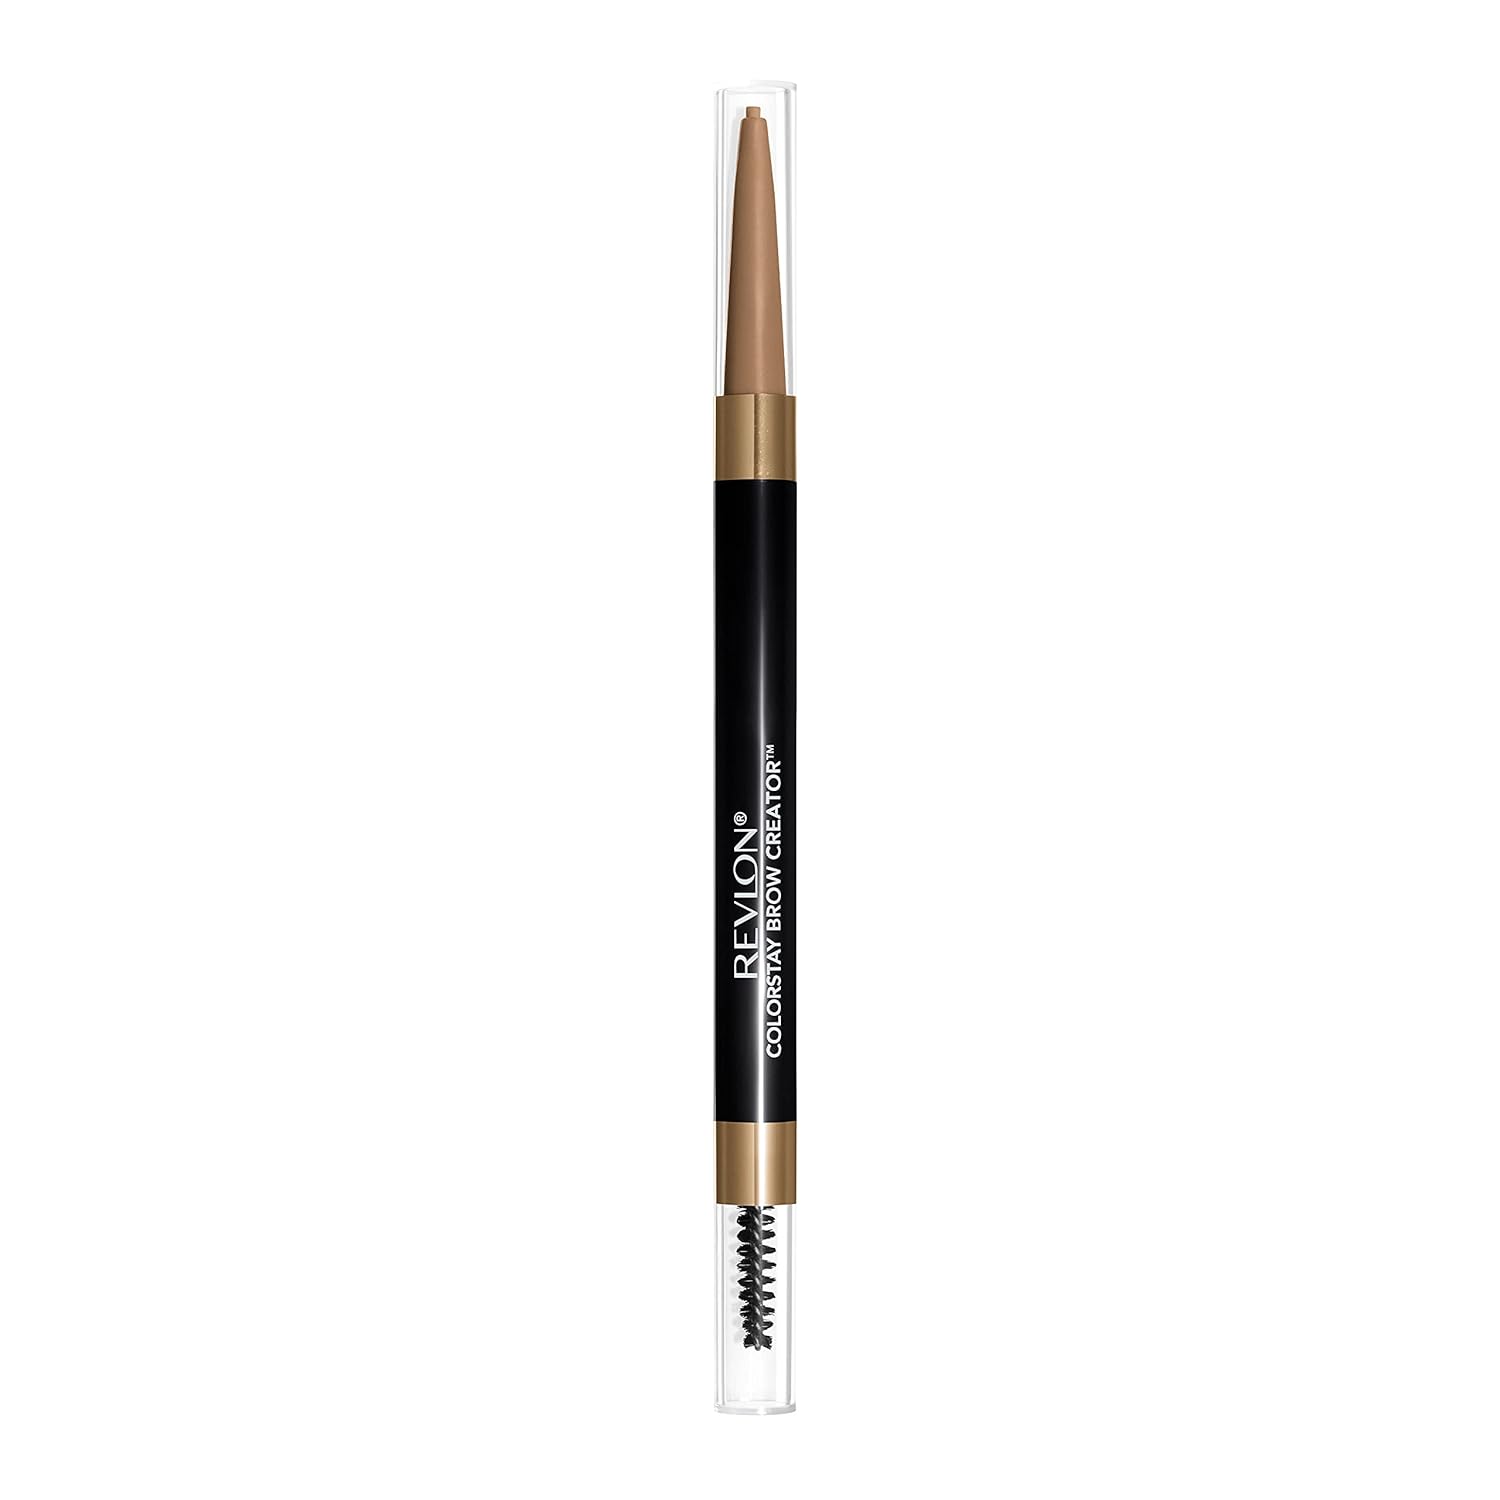 Revlon Eyebrow Pencil & Powder, ColorStay Brow Creator 2-in-1 Eye Makeup with Spoolie, Longwearing with Precision Tip, 600 Blonde, 0.23